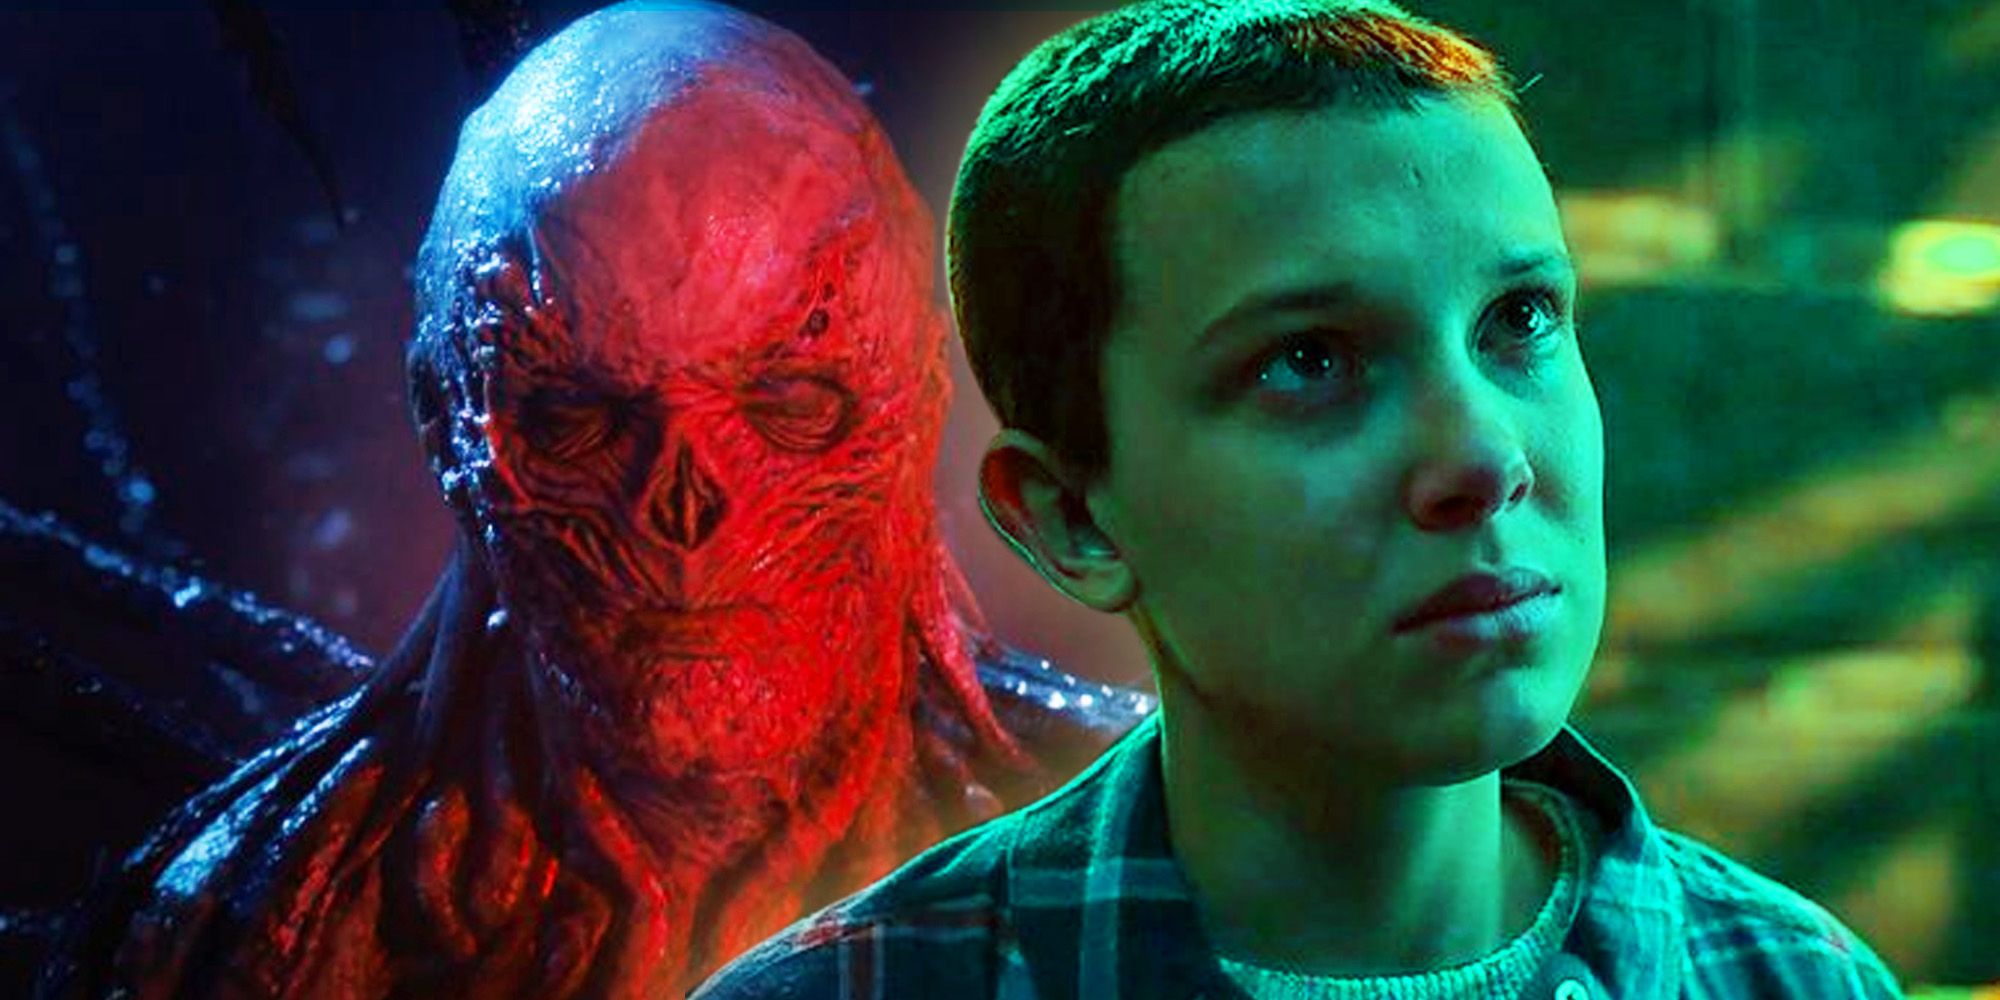 Collage of Vecna (Jamie Campbell Bower) and Eleven (Millie Bobby Brown) in season 4 of Stranger Things